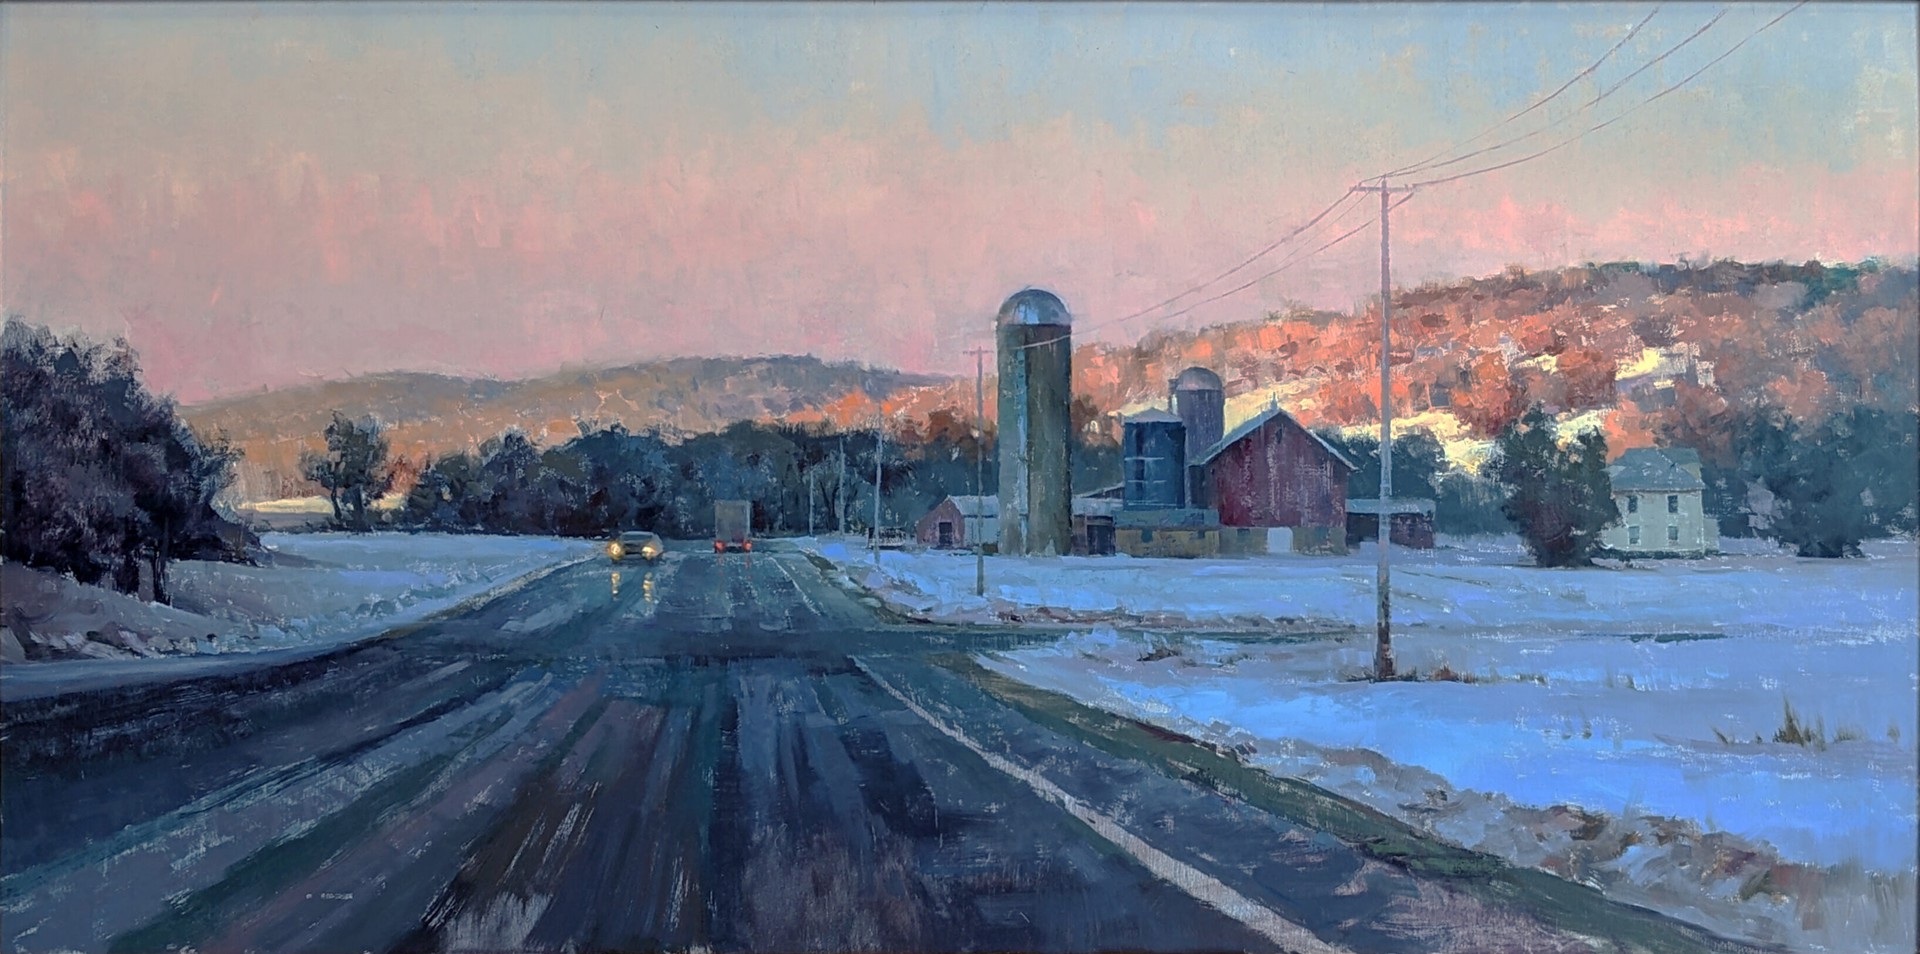 Driftless Farm Road by Marc Anderson